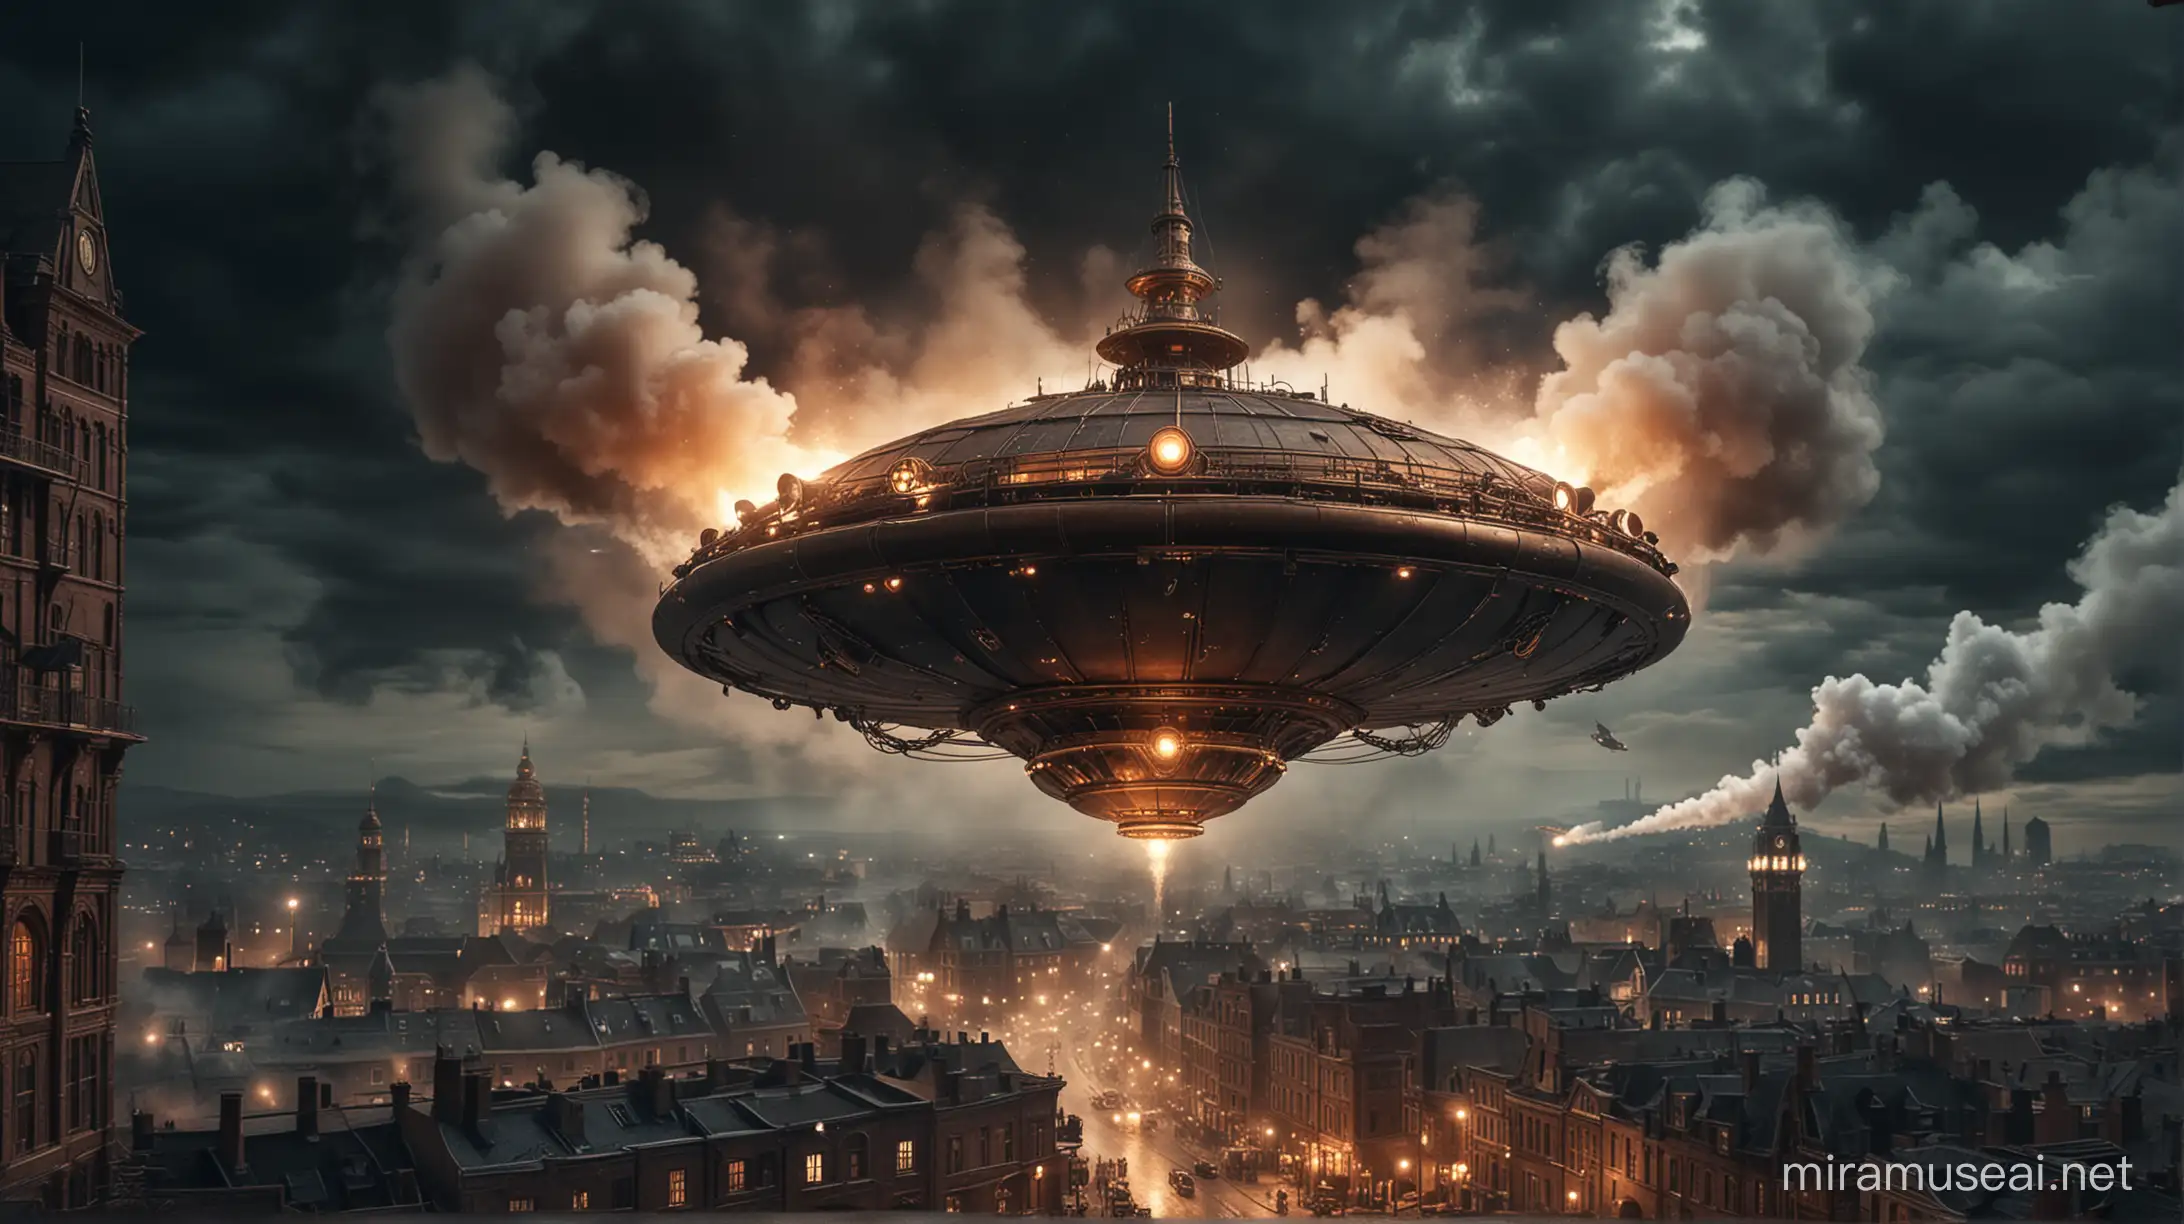 a big steampunk flying saucer as large as a city over a steampunk city. steam, smoke, copper, brass, steel. dark night. the city is well illuminated. distant view.